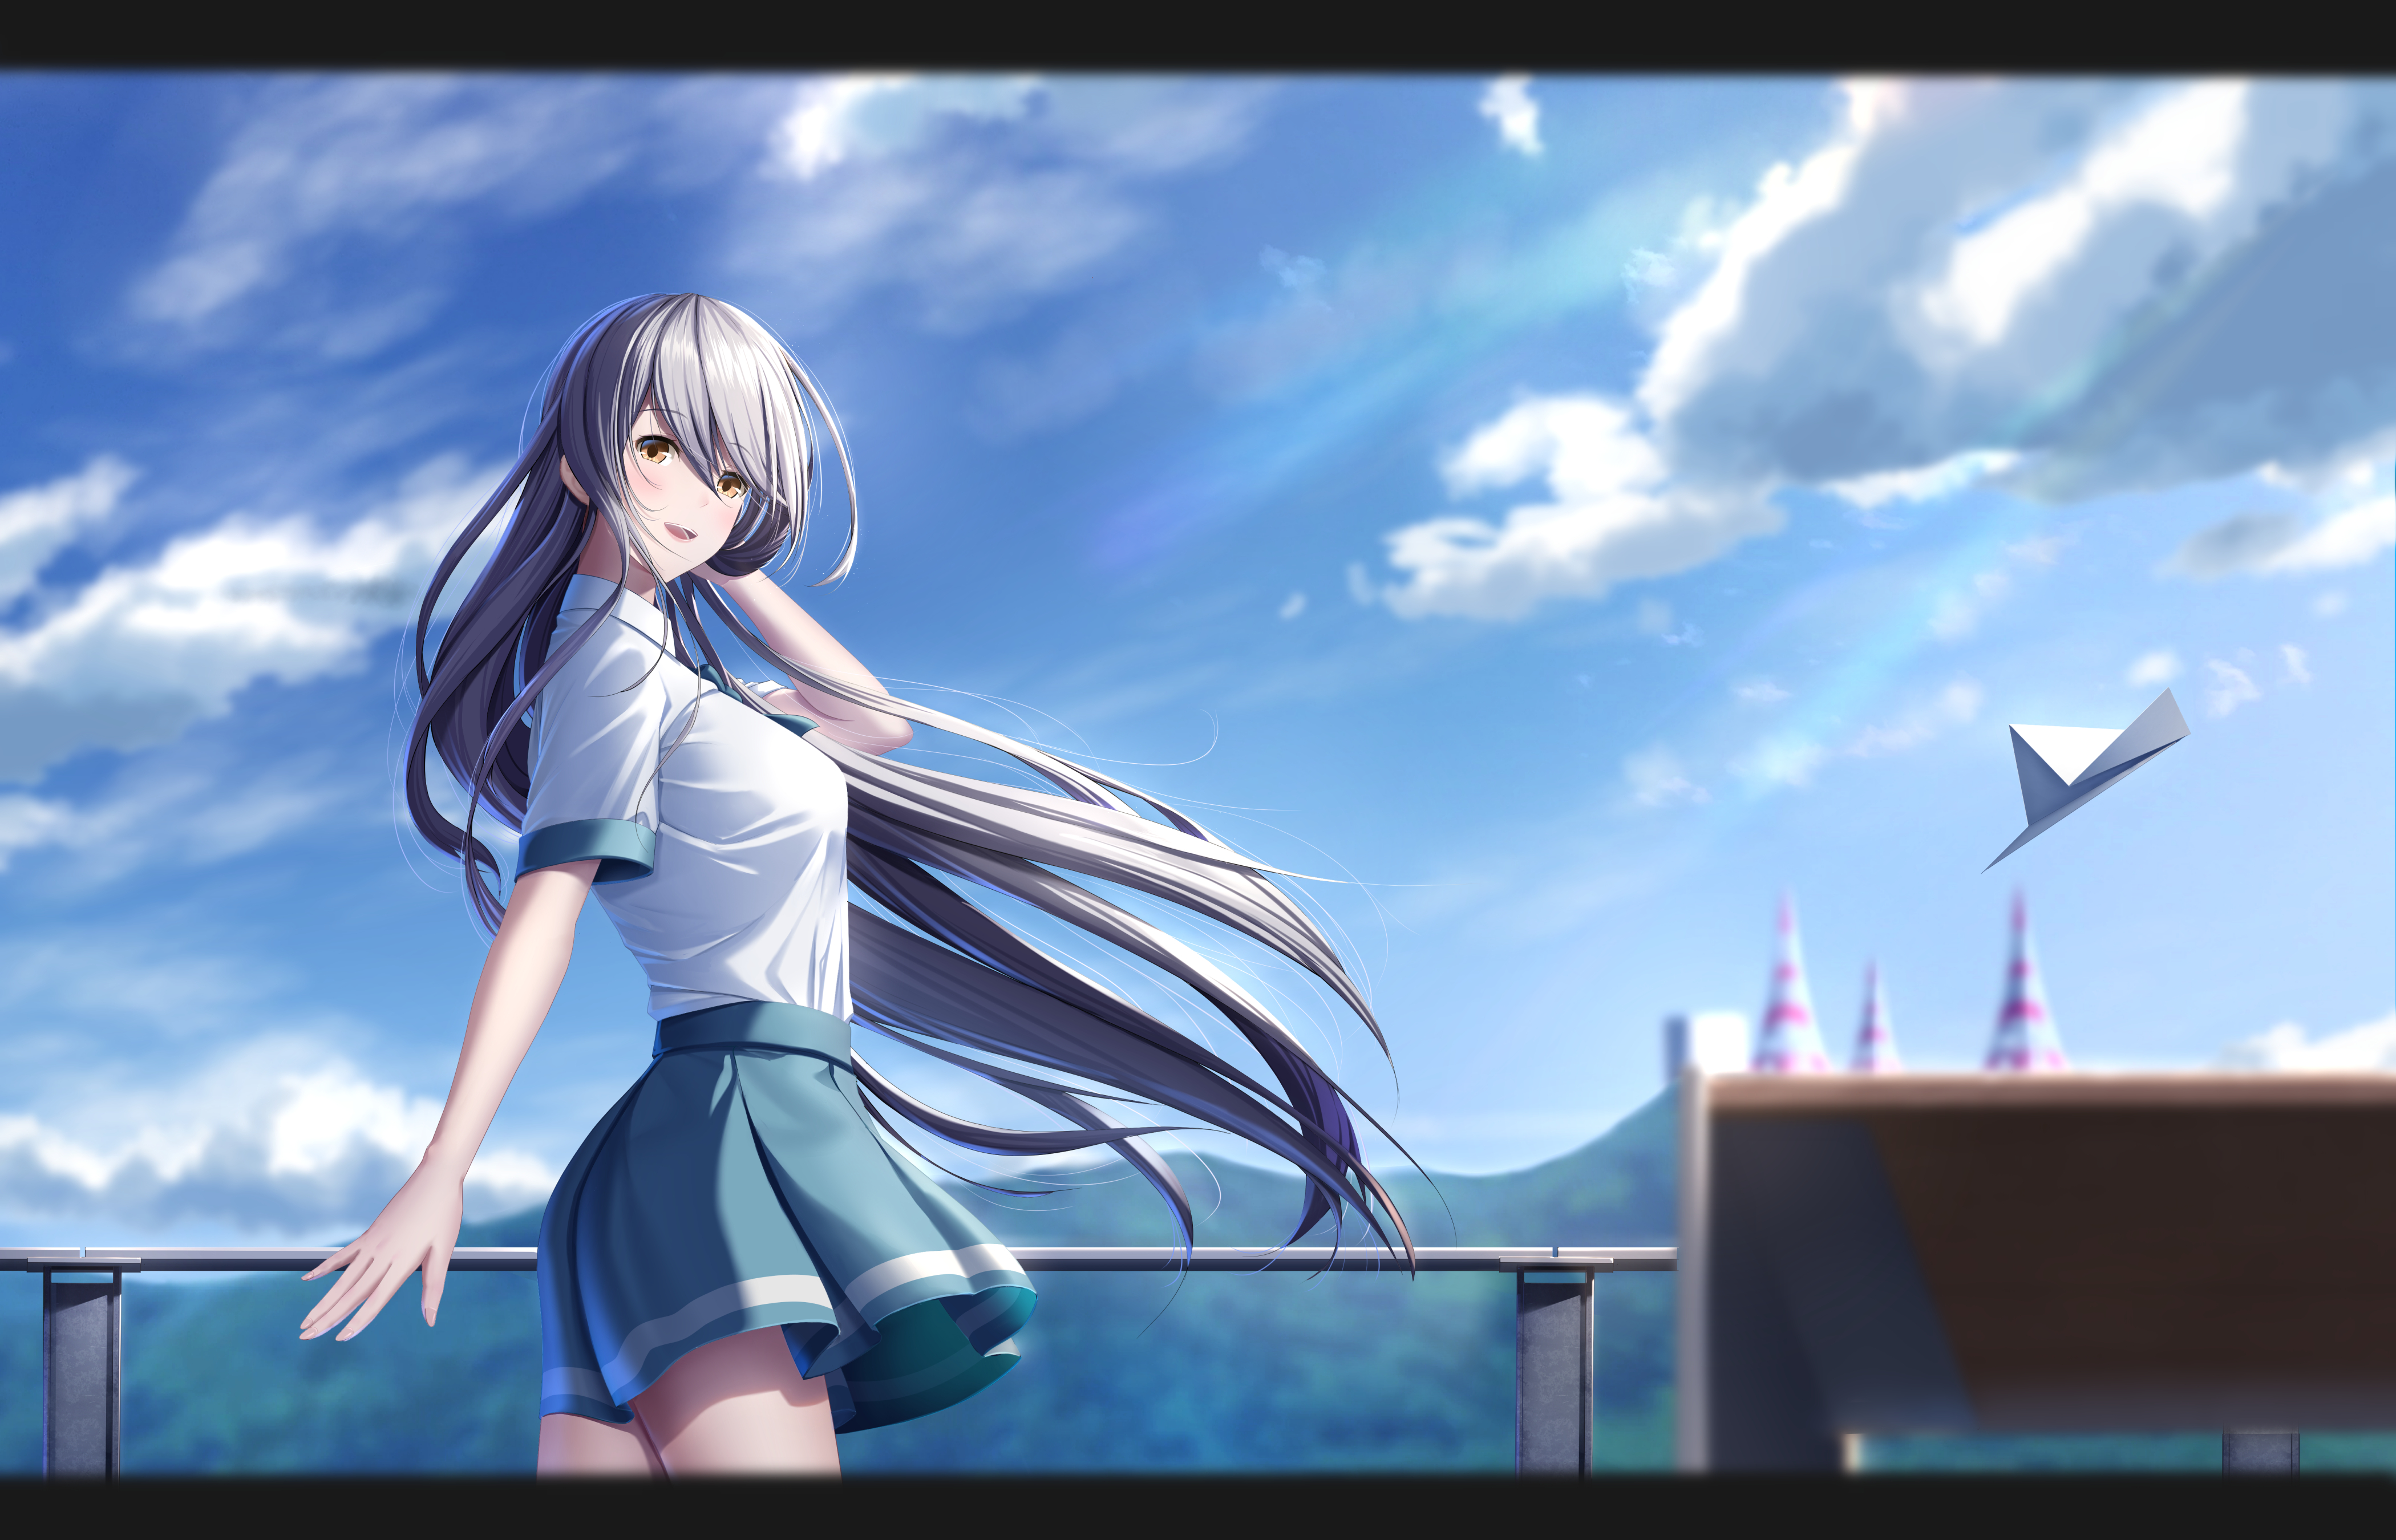 Anime Iroduku: The World in Colors 4k Ultra HD Wallpaper by lazy光光